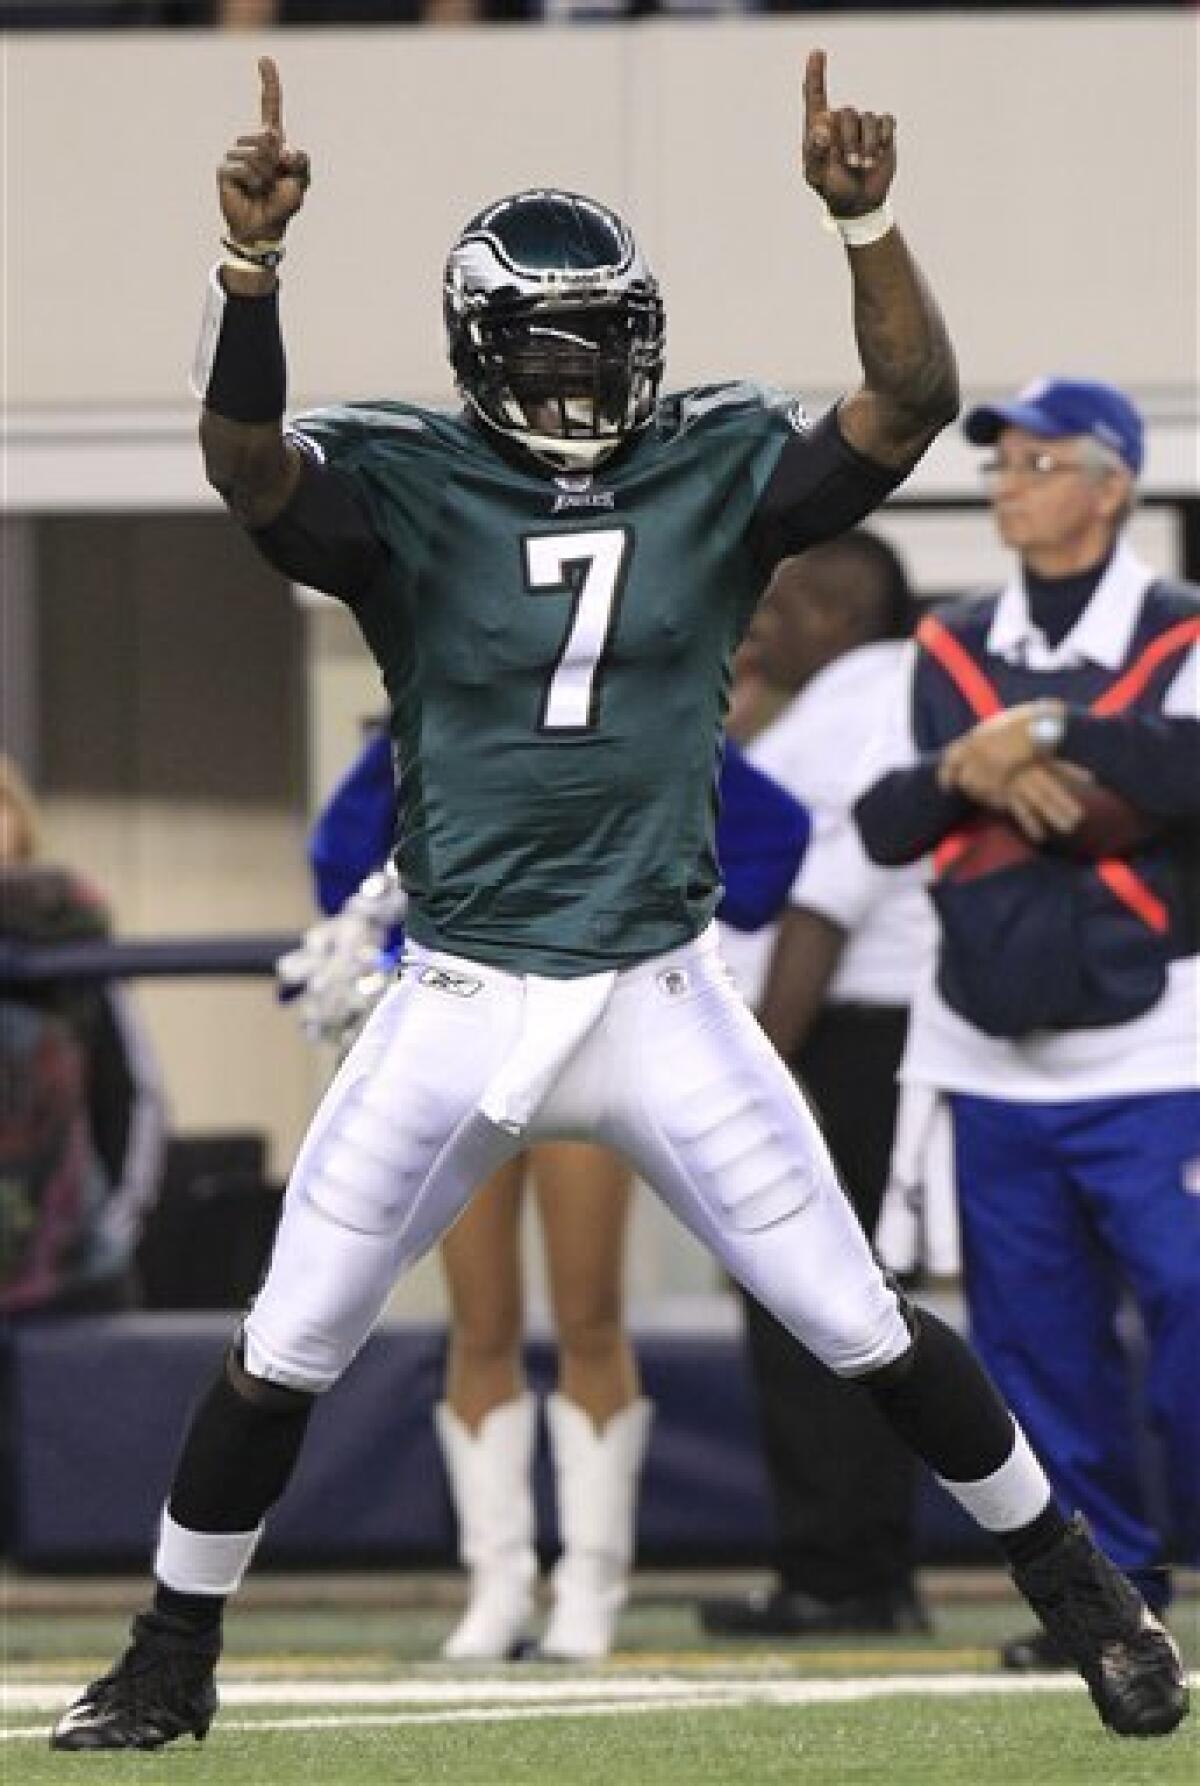 Vick signs 1-year deal with Eagles - The San Diego Union-Tribune